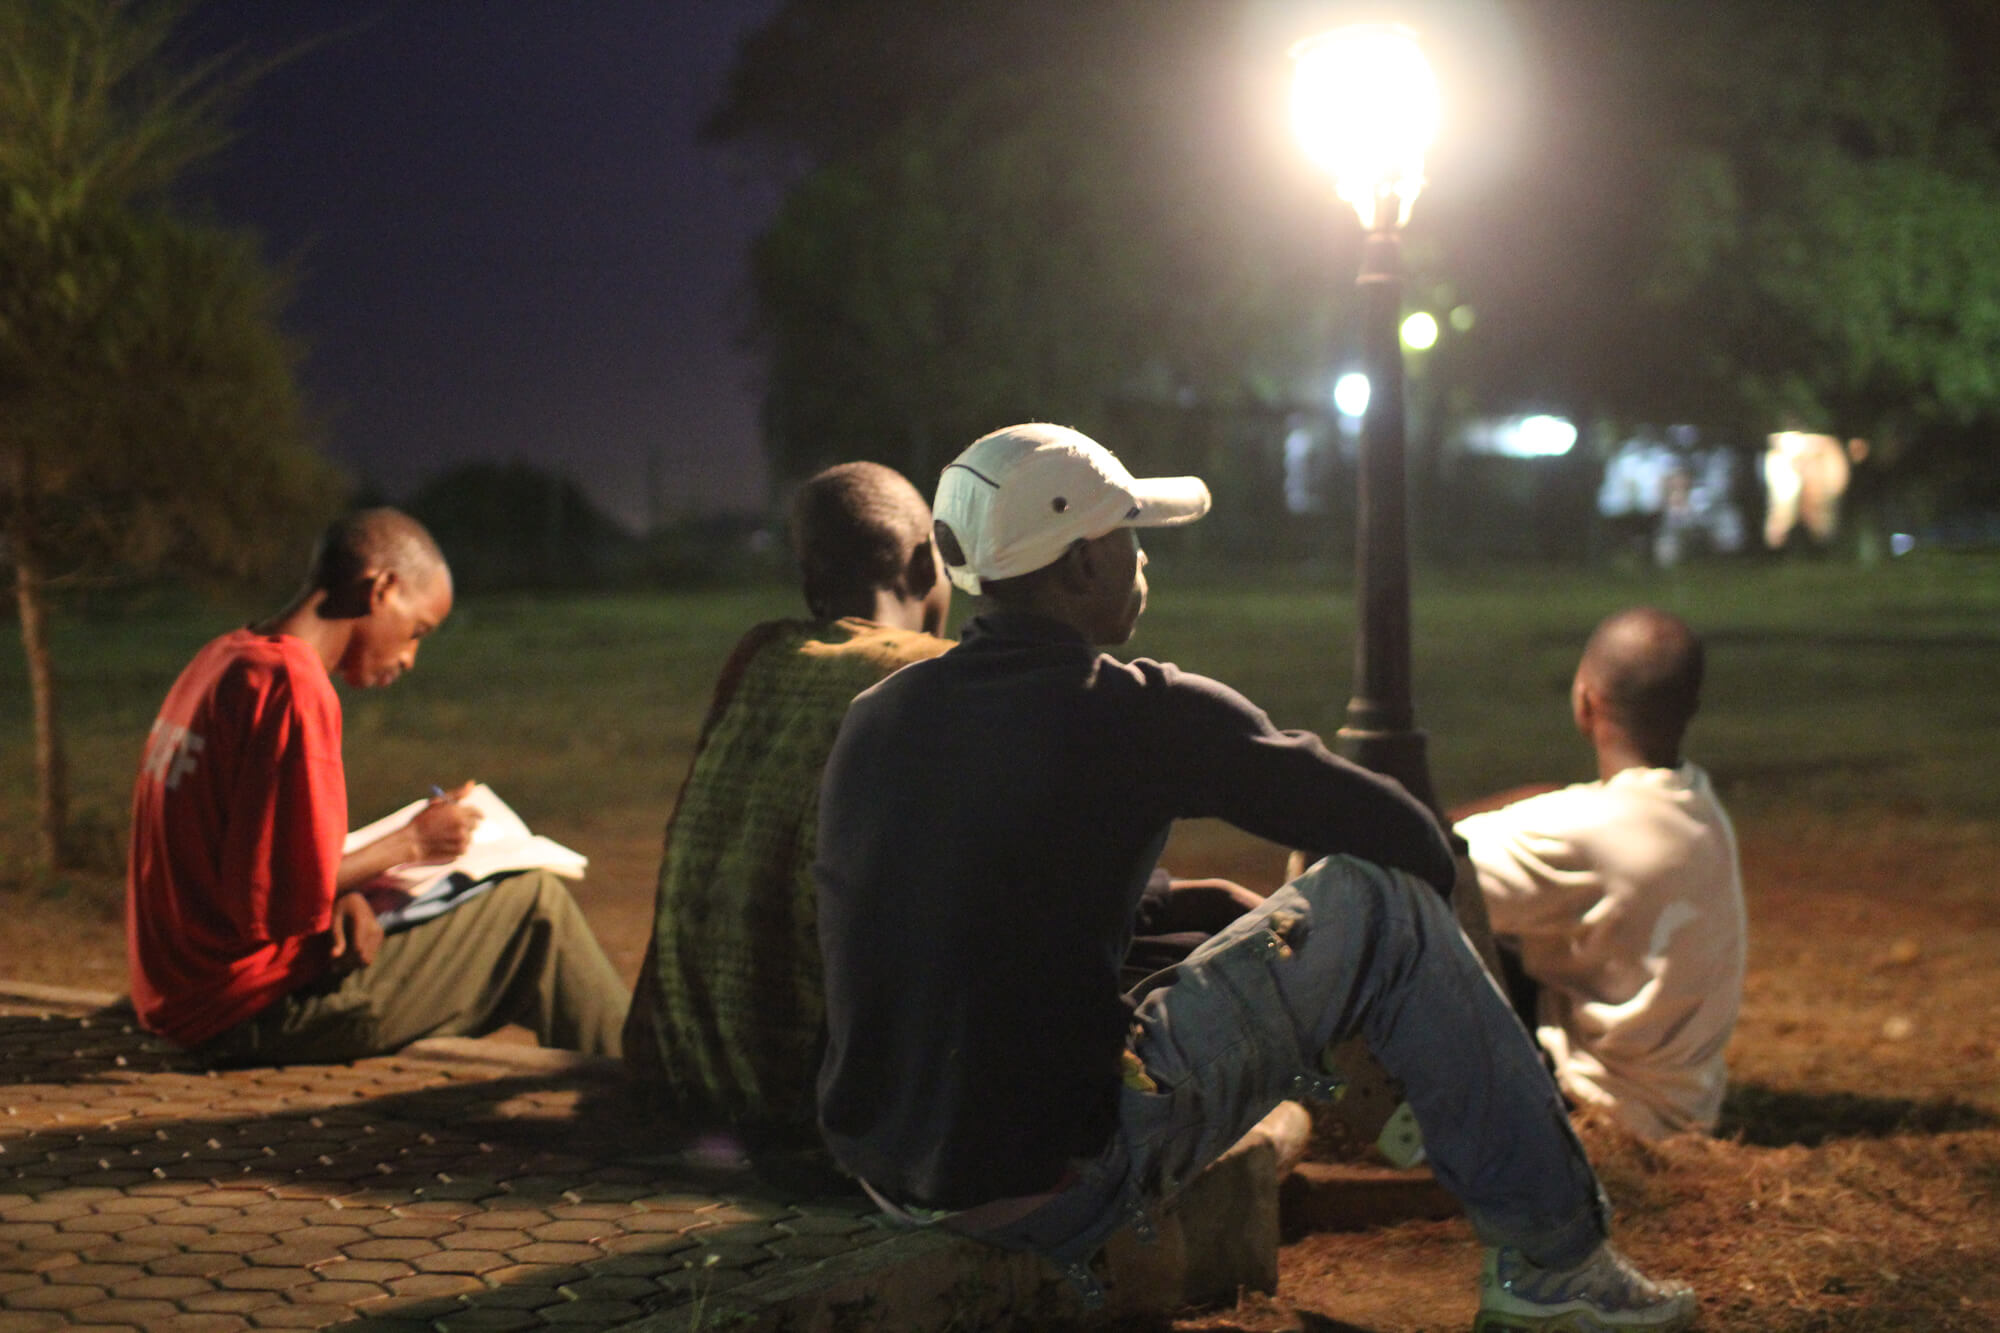 A group of young men are sitting in a park, there is a street light that is illuminating them.